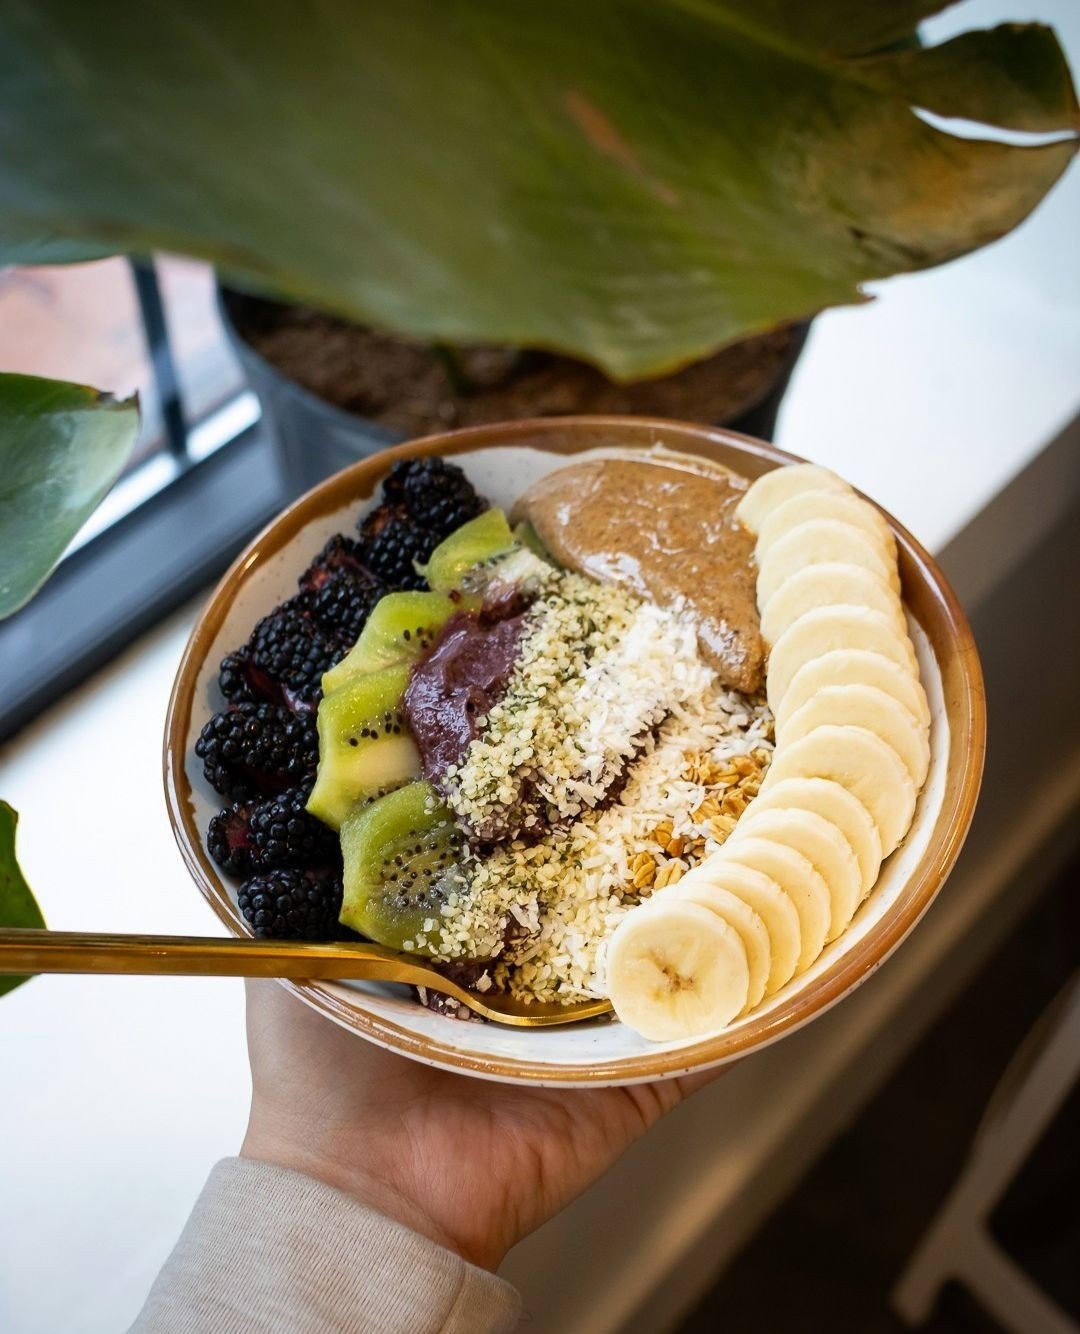 HAPPY FRIDAY!⁠
We are open today, 7AM - 2PM.⁠
⁠
✹THE RISE BOWL✹⁠
⁠
This tasty, nourishing bowl features our classic acai blend, topped with @grandyorganics gluten-free granola, banana, blackberries, almond butter, and health-boosting hemp seeds.⁠
⁠
P